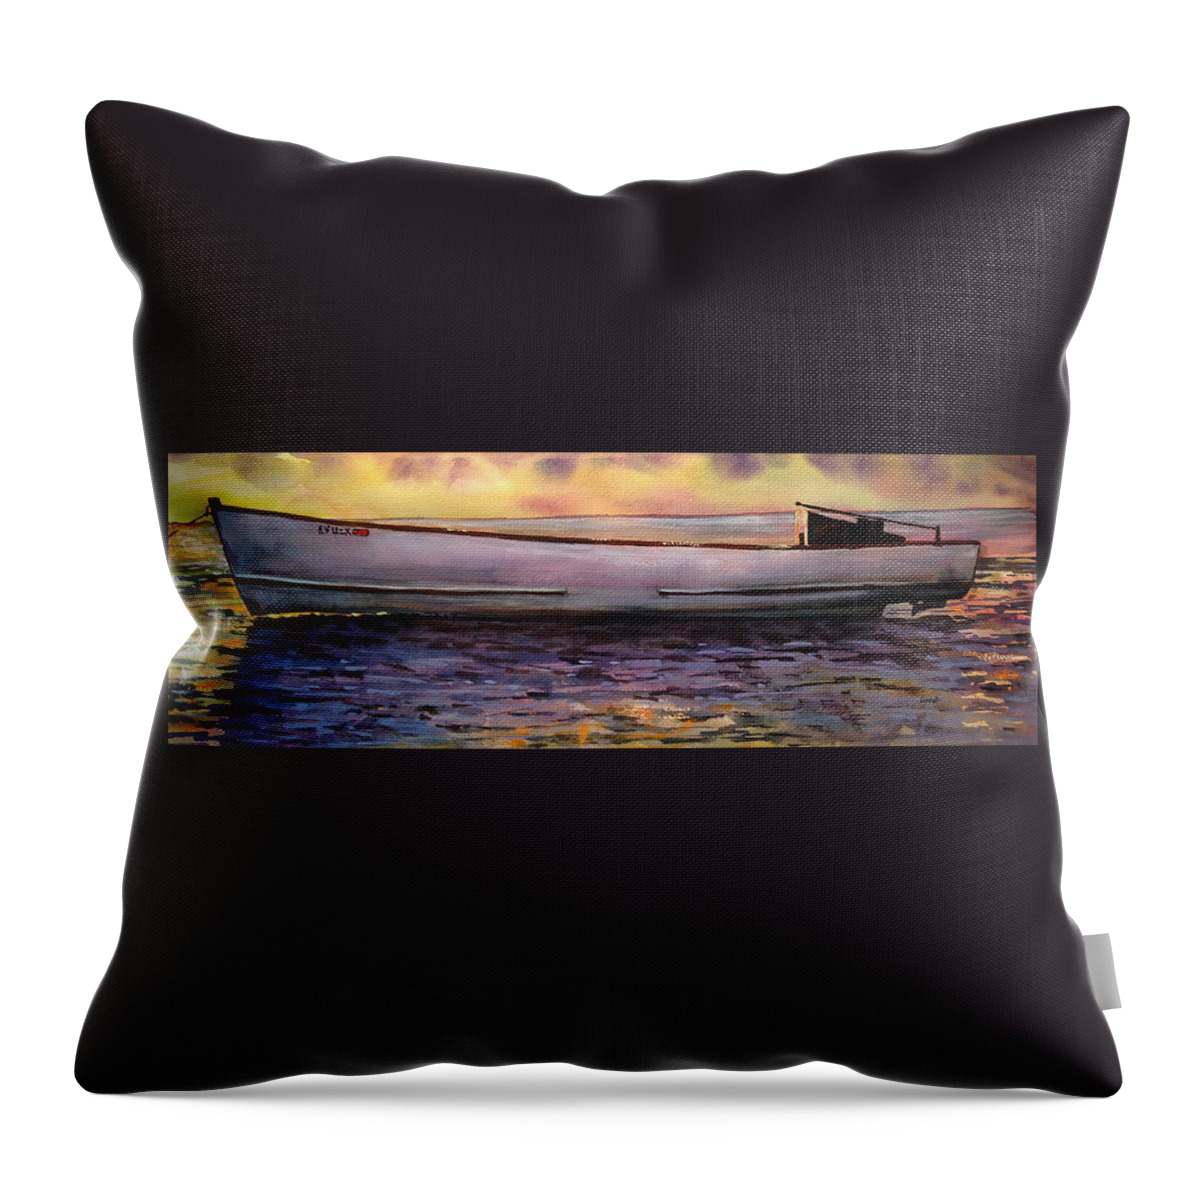 30 X 12 Studio Watercolor Throw Pillow featuring the painting Viggo's Boat by Lynne Haines